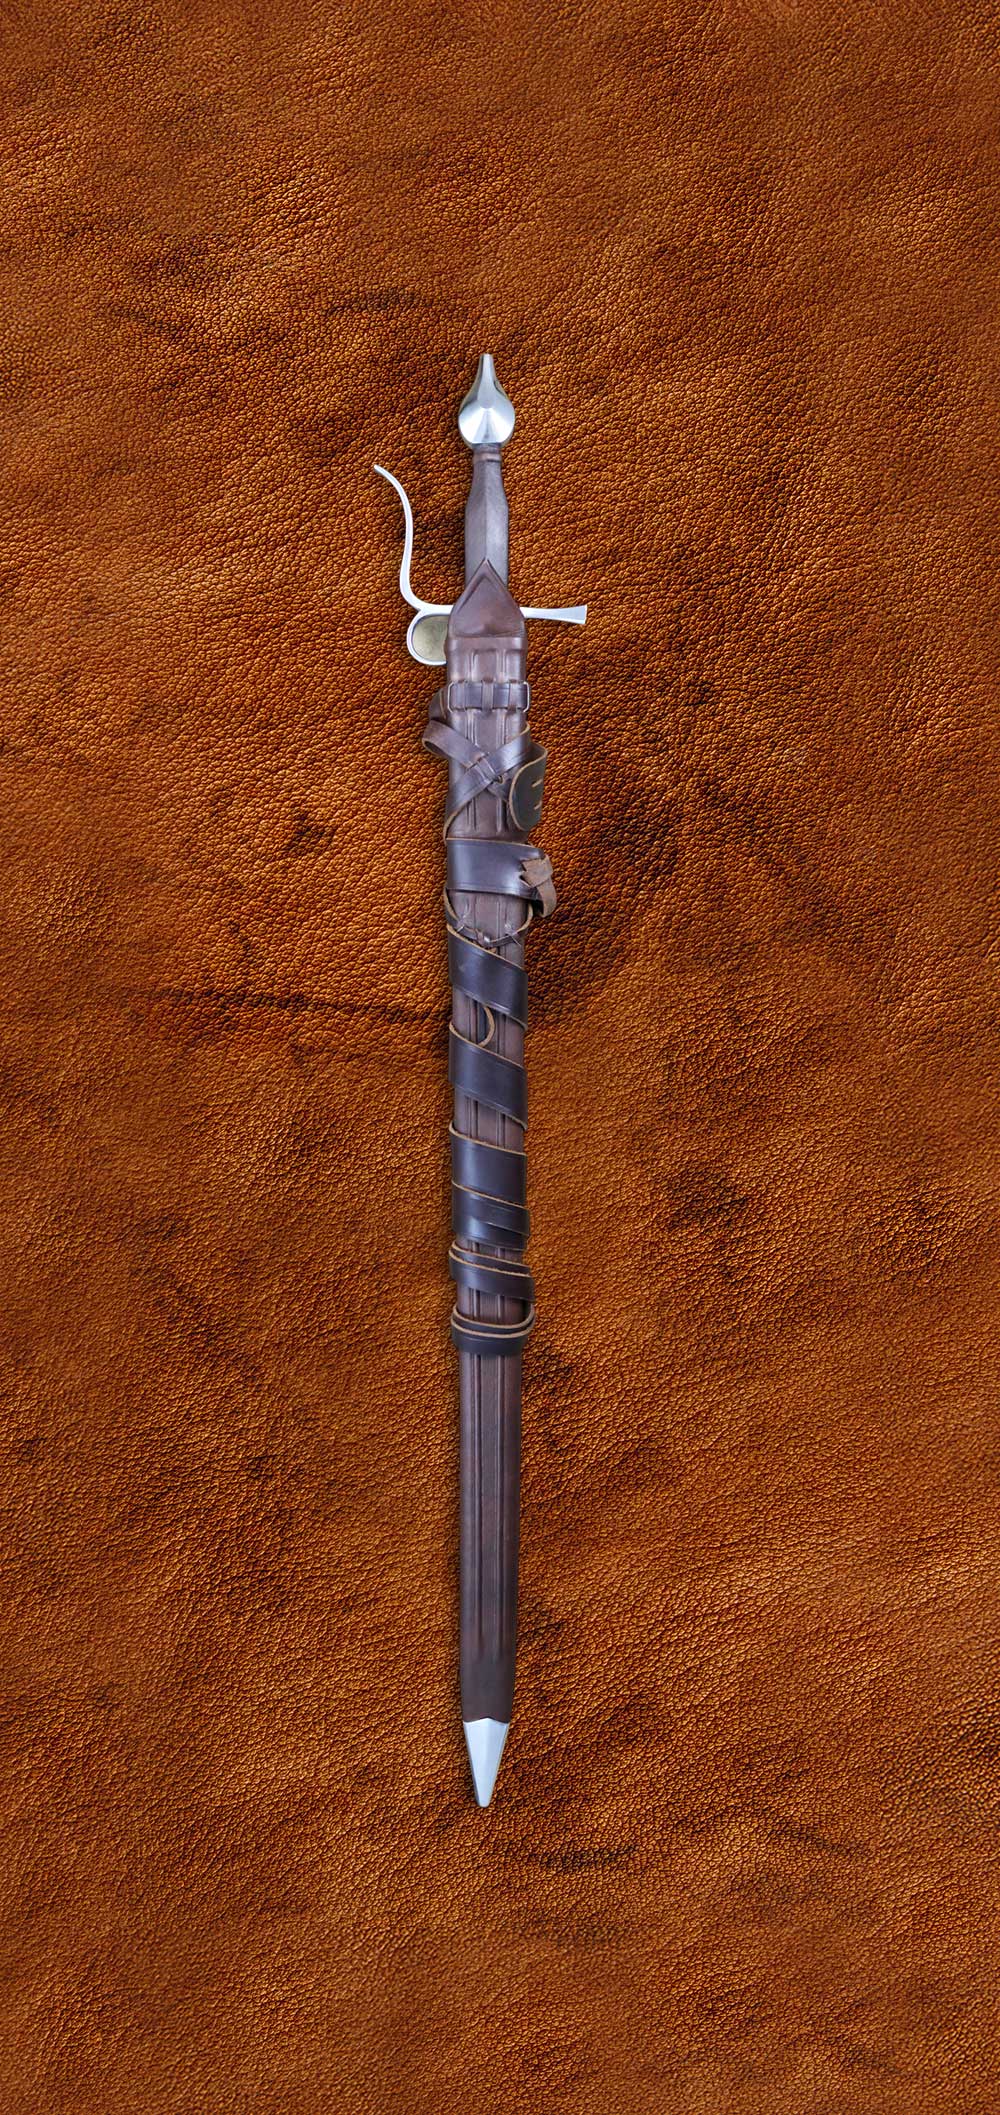 doge-sword-medieval-weapon-darksword-armory-in-scabbard-